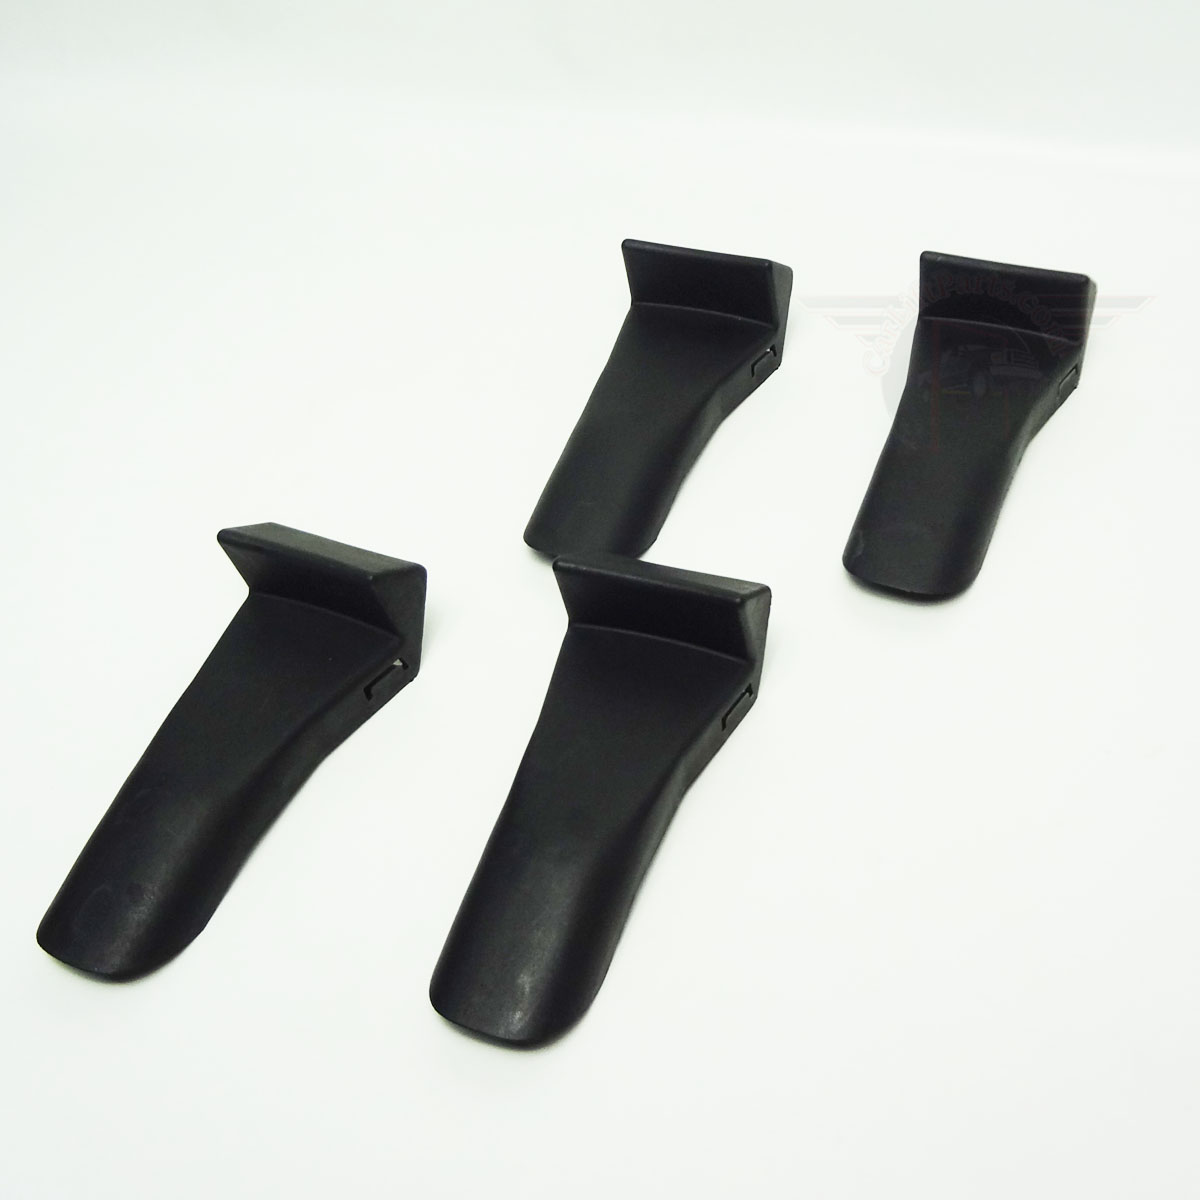 4PCS/LOT Jaw Cover Wheel Protectors for Coats Tire Changer Clamp Guards